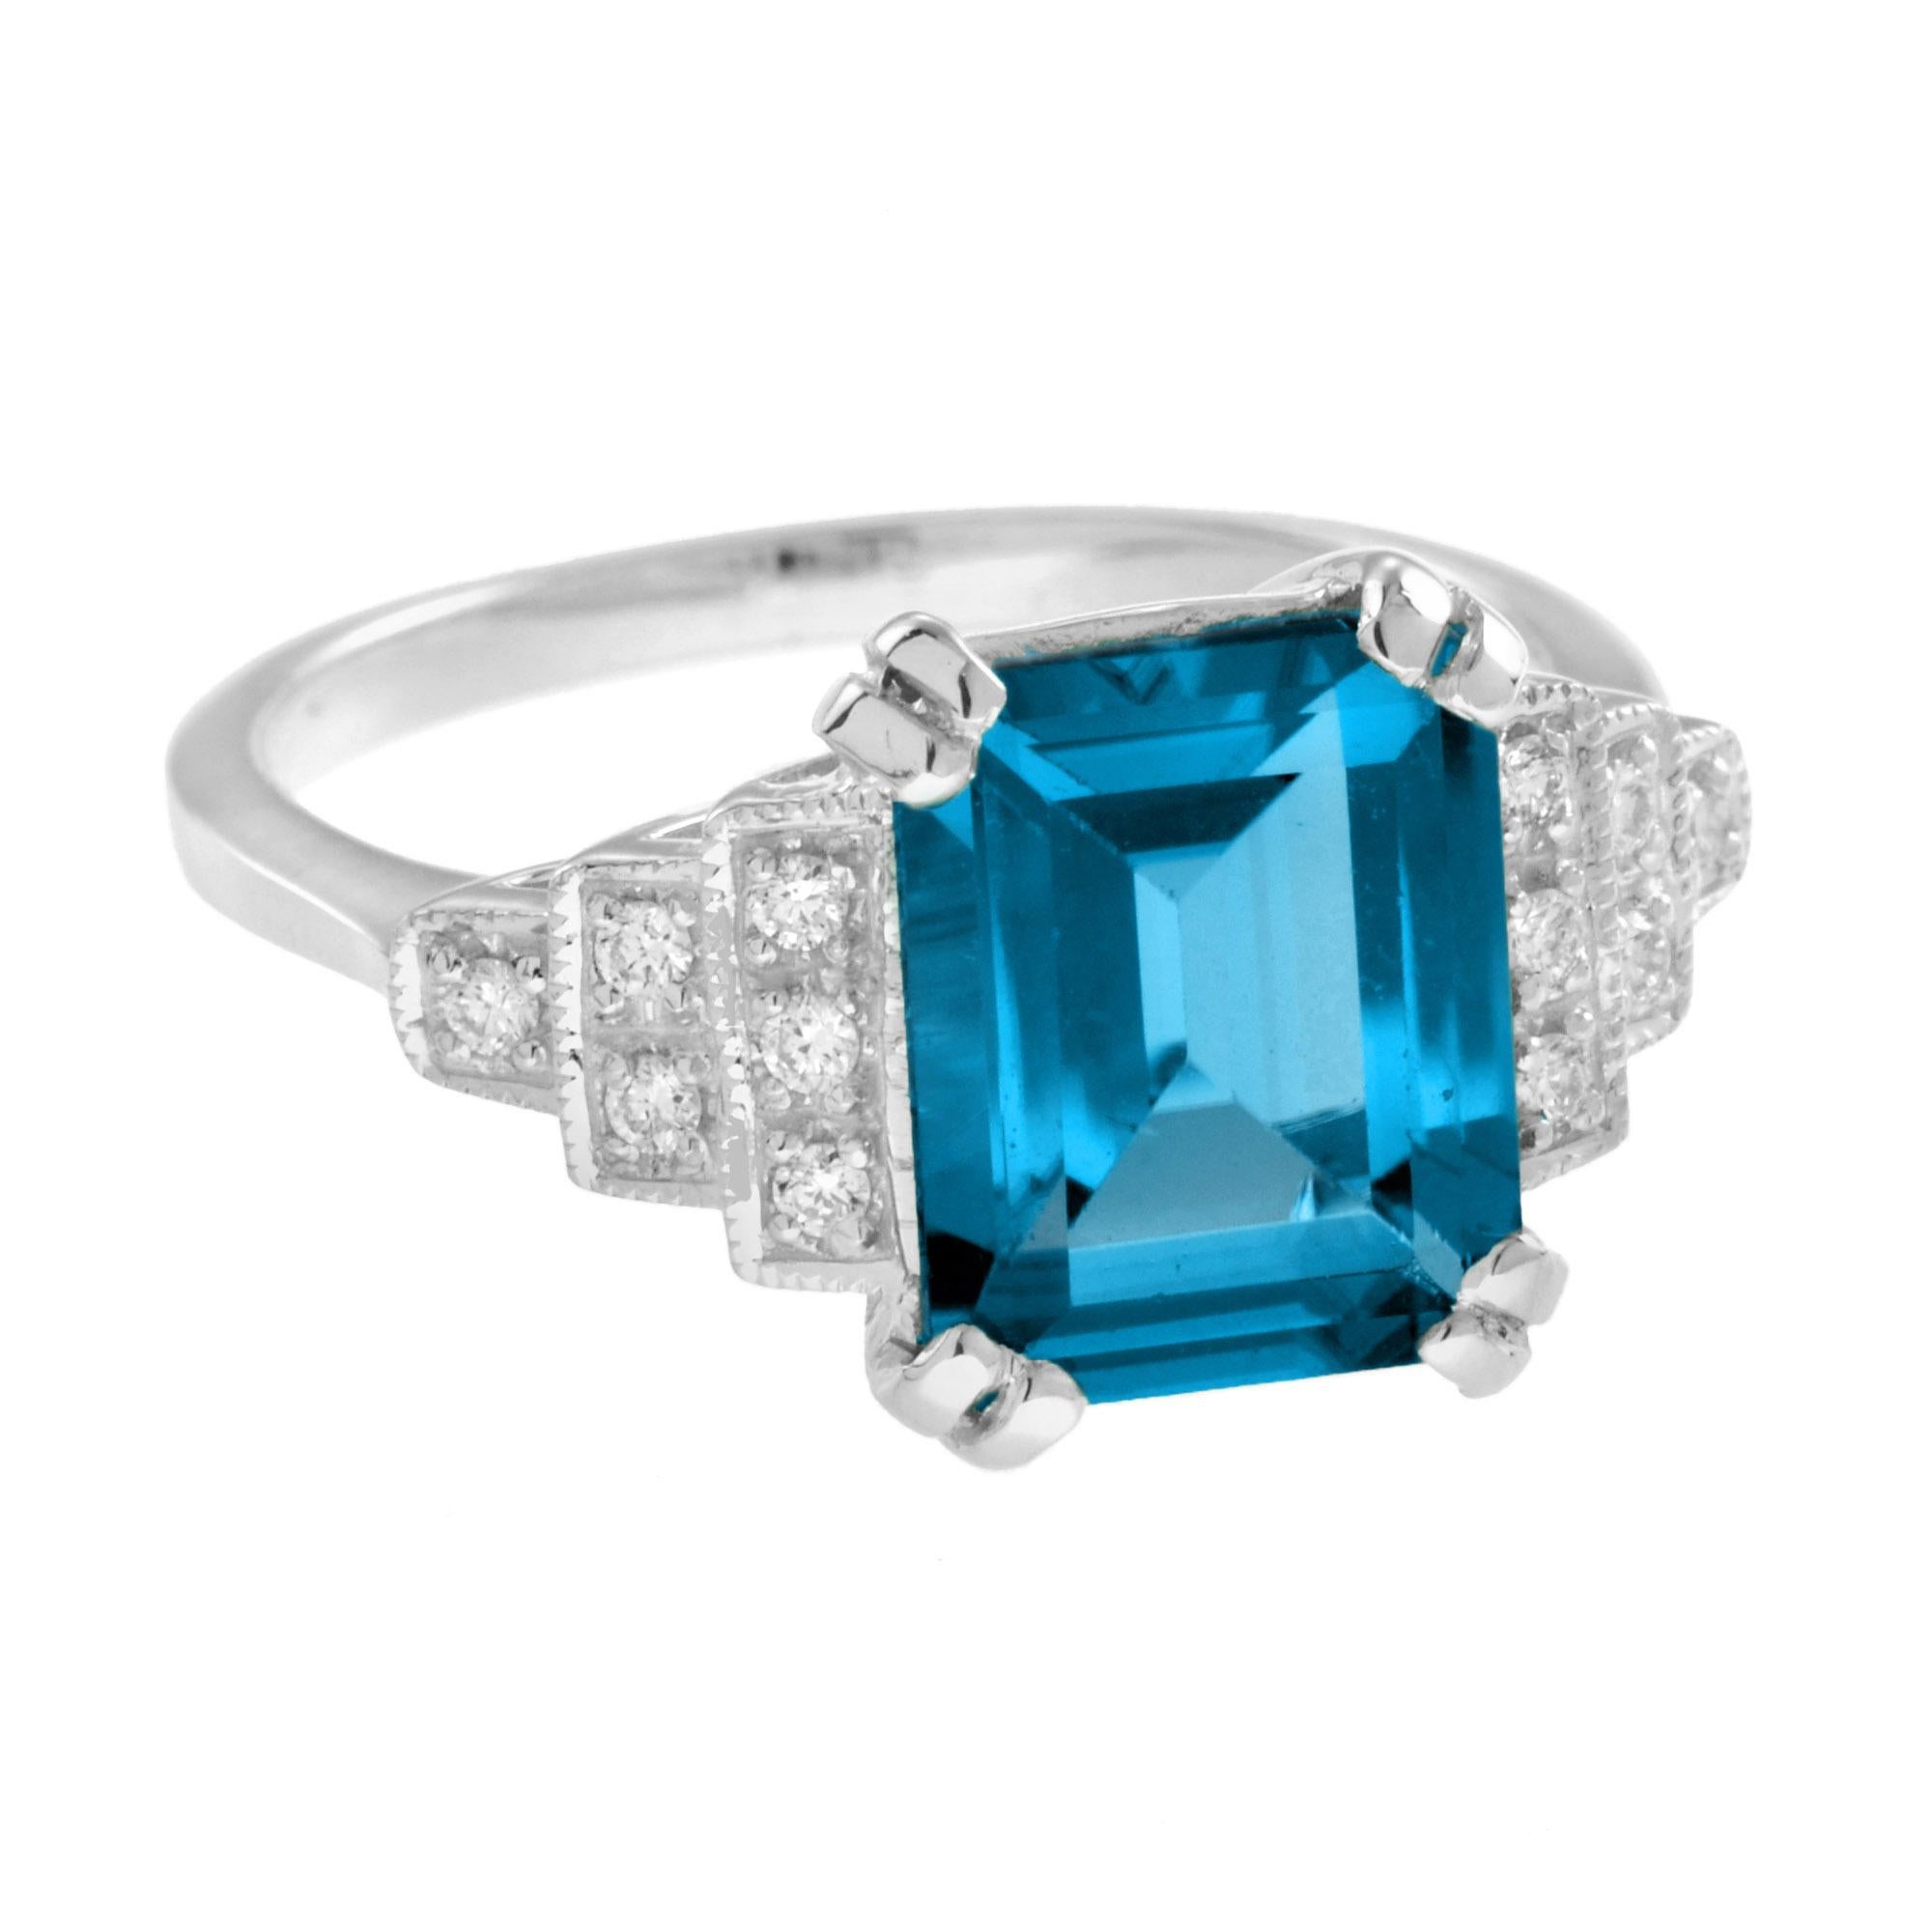 For Sale:  Emerald Cut London Blue Topaz and Step Diamond Engagement Ring in 18K White Gold 3